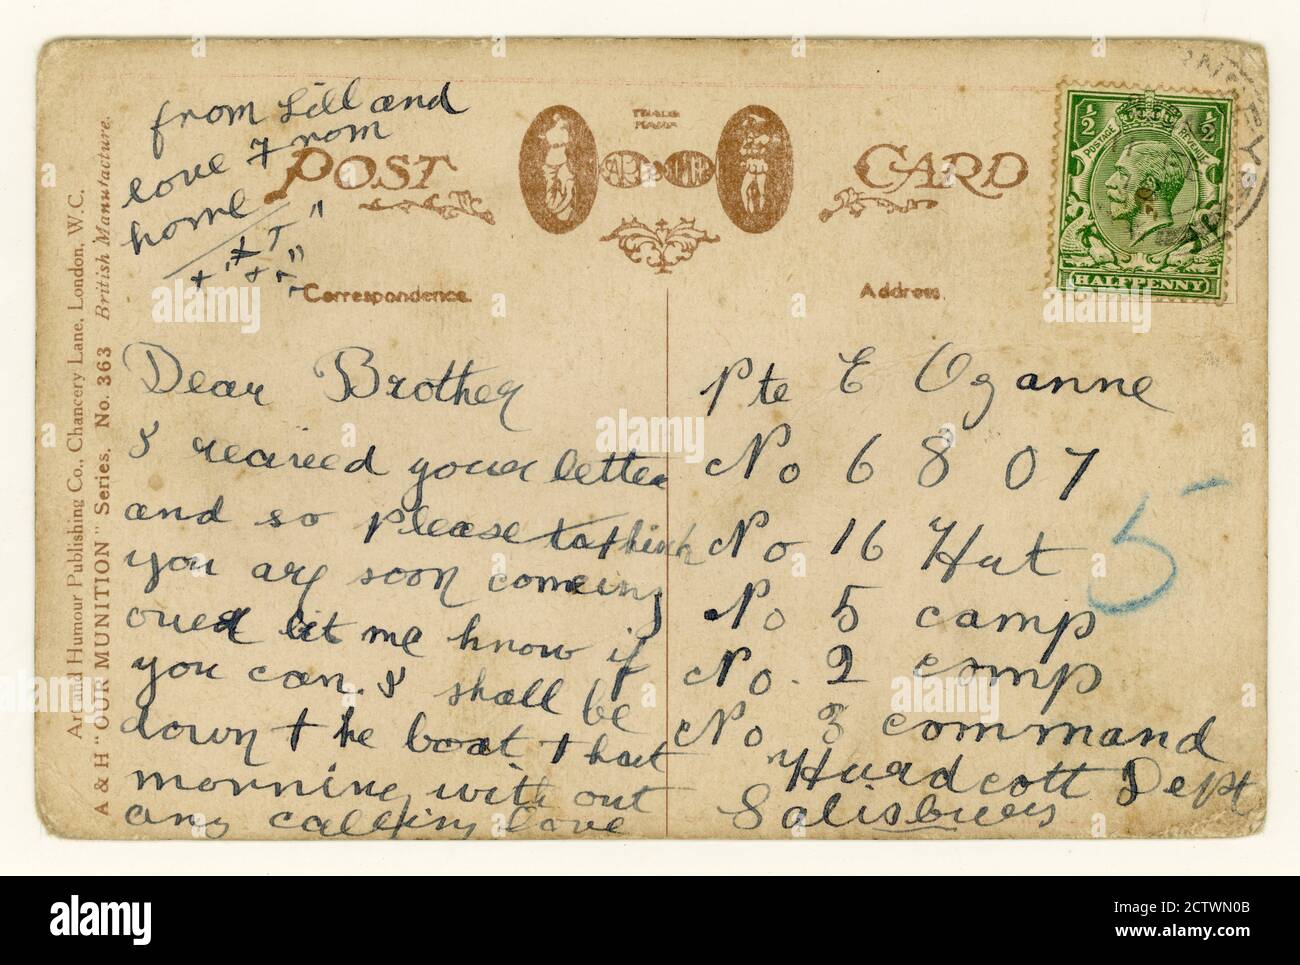 Reverse of WW1 era  postcard, green King George V 1/2 d (half pence / penny) stamp, posted 11 Feb 1918, to a soldier at  Hurdcott Camp, Salisbury, prob. convalescing in no. 5 camp. U.K Stock Photo